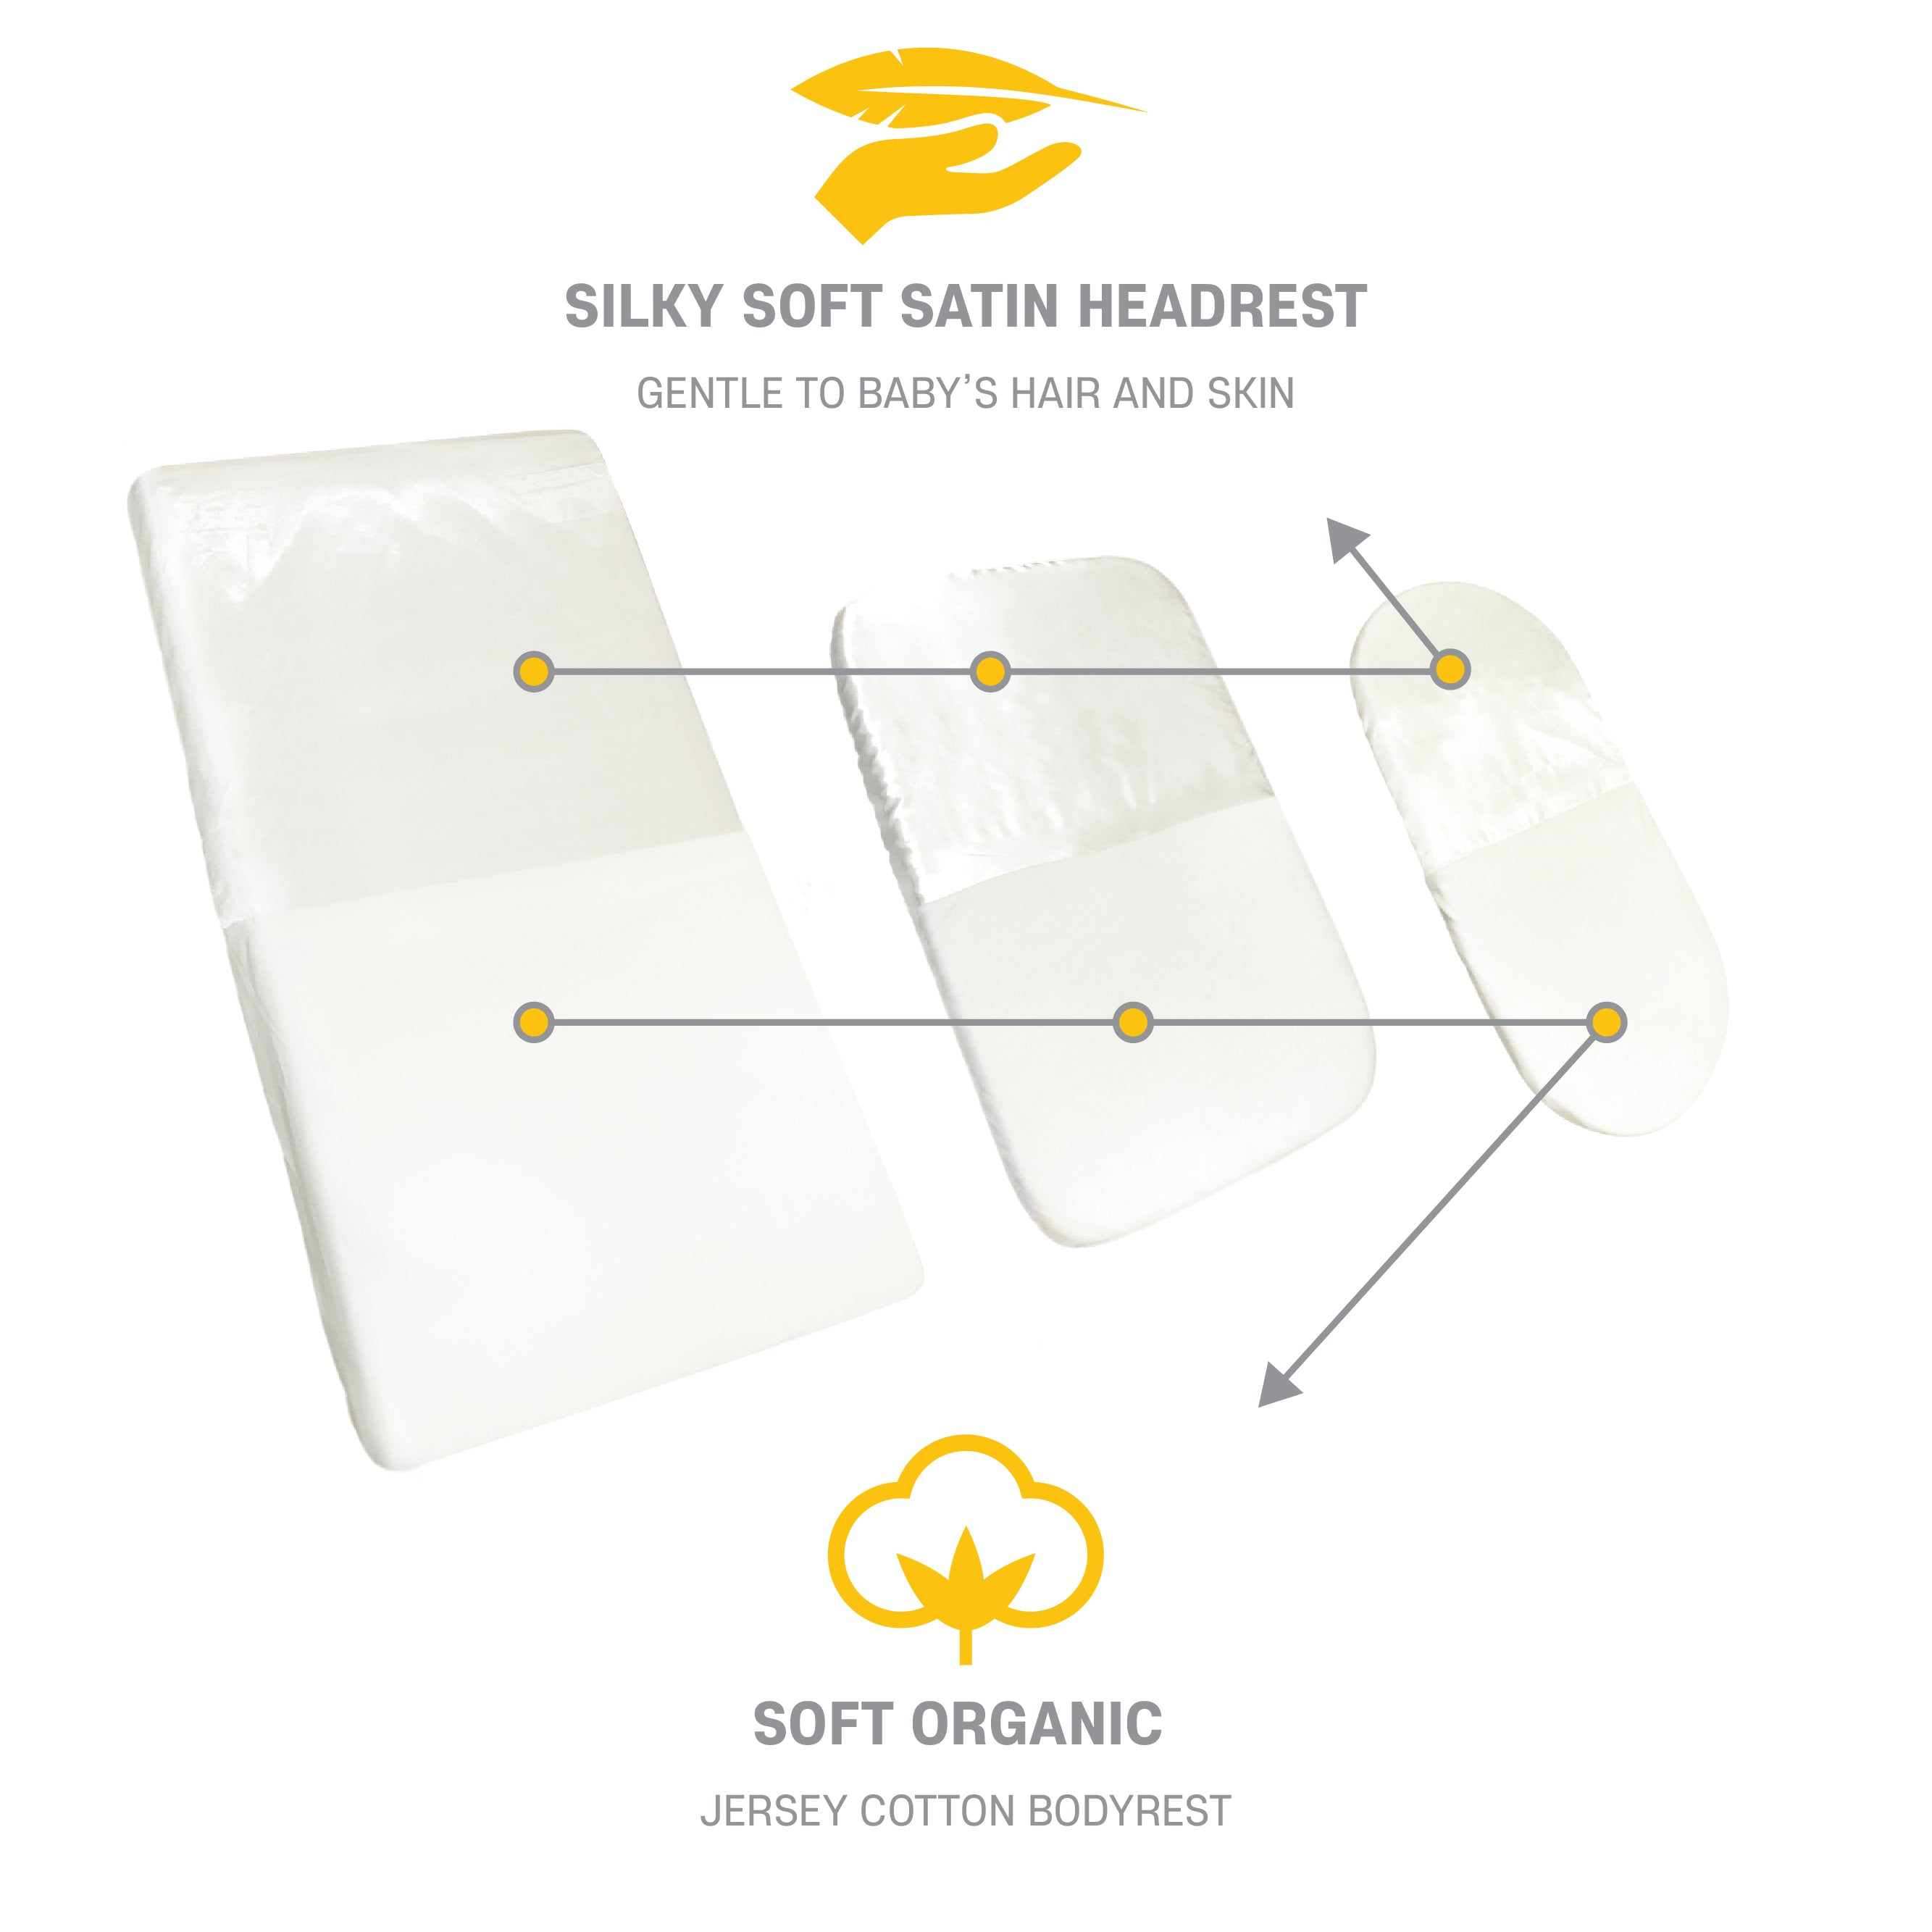 Range of satin sheets for a babies and toddlers